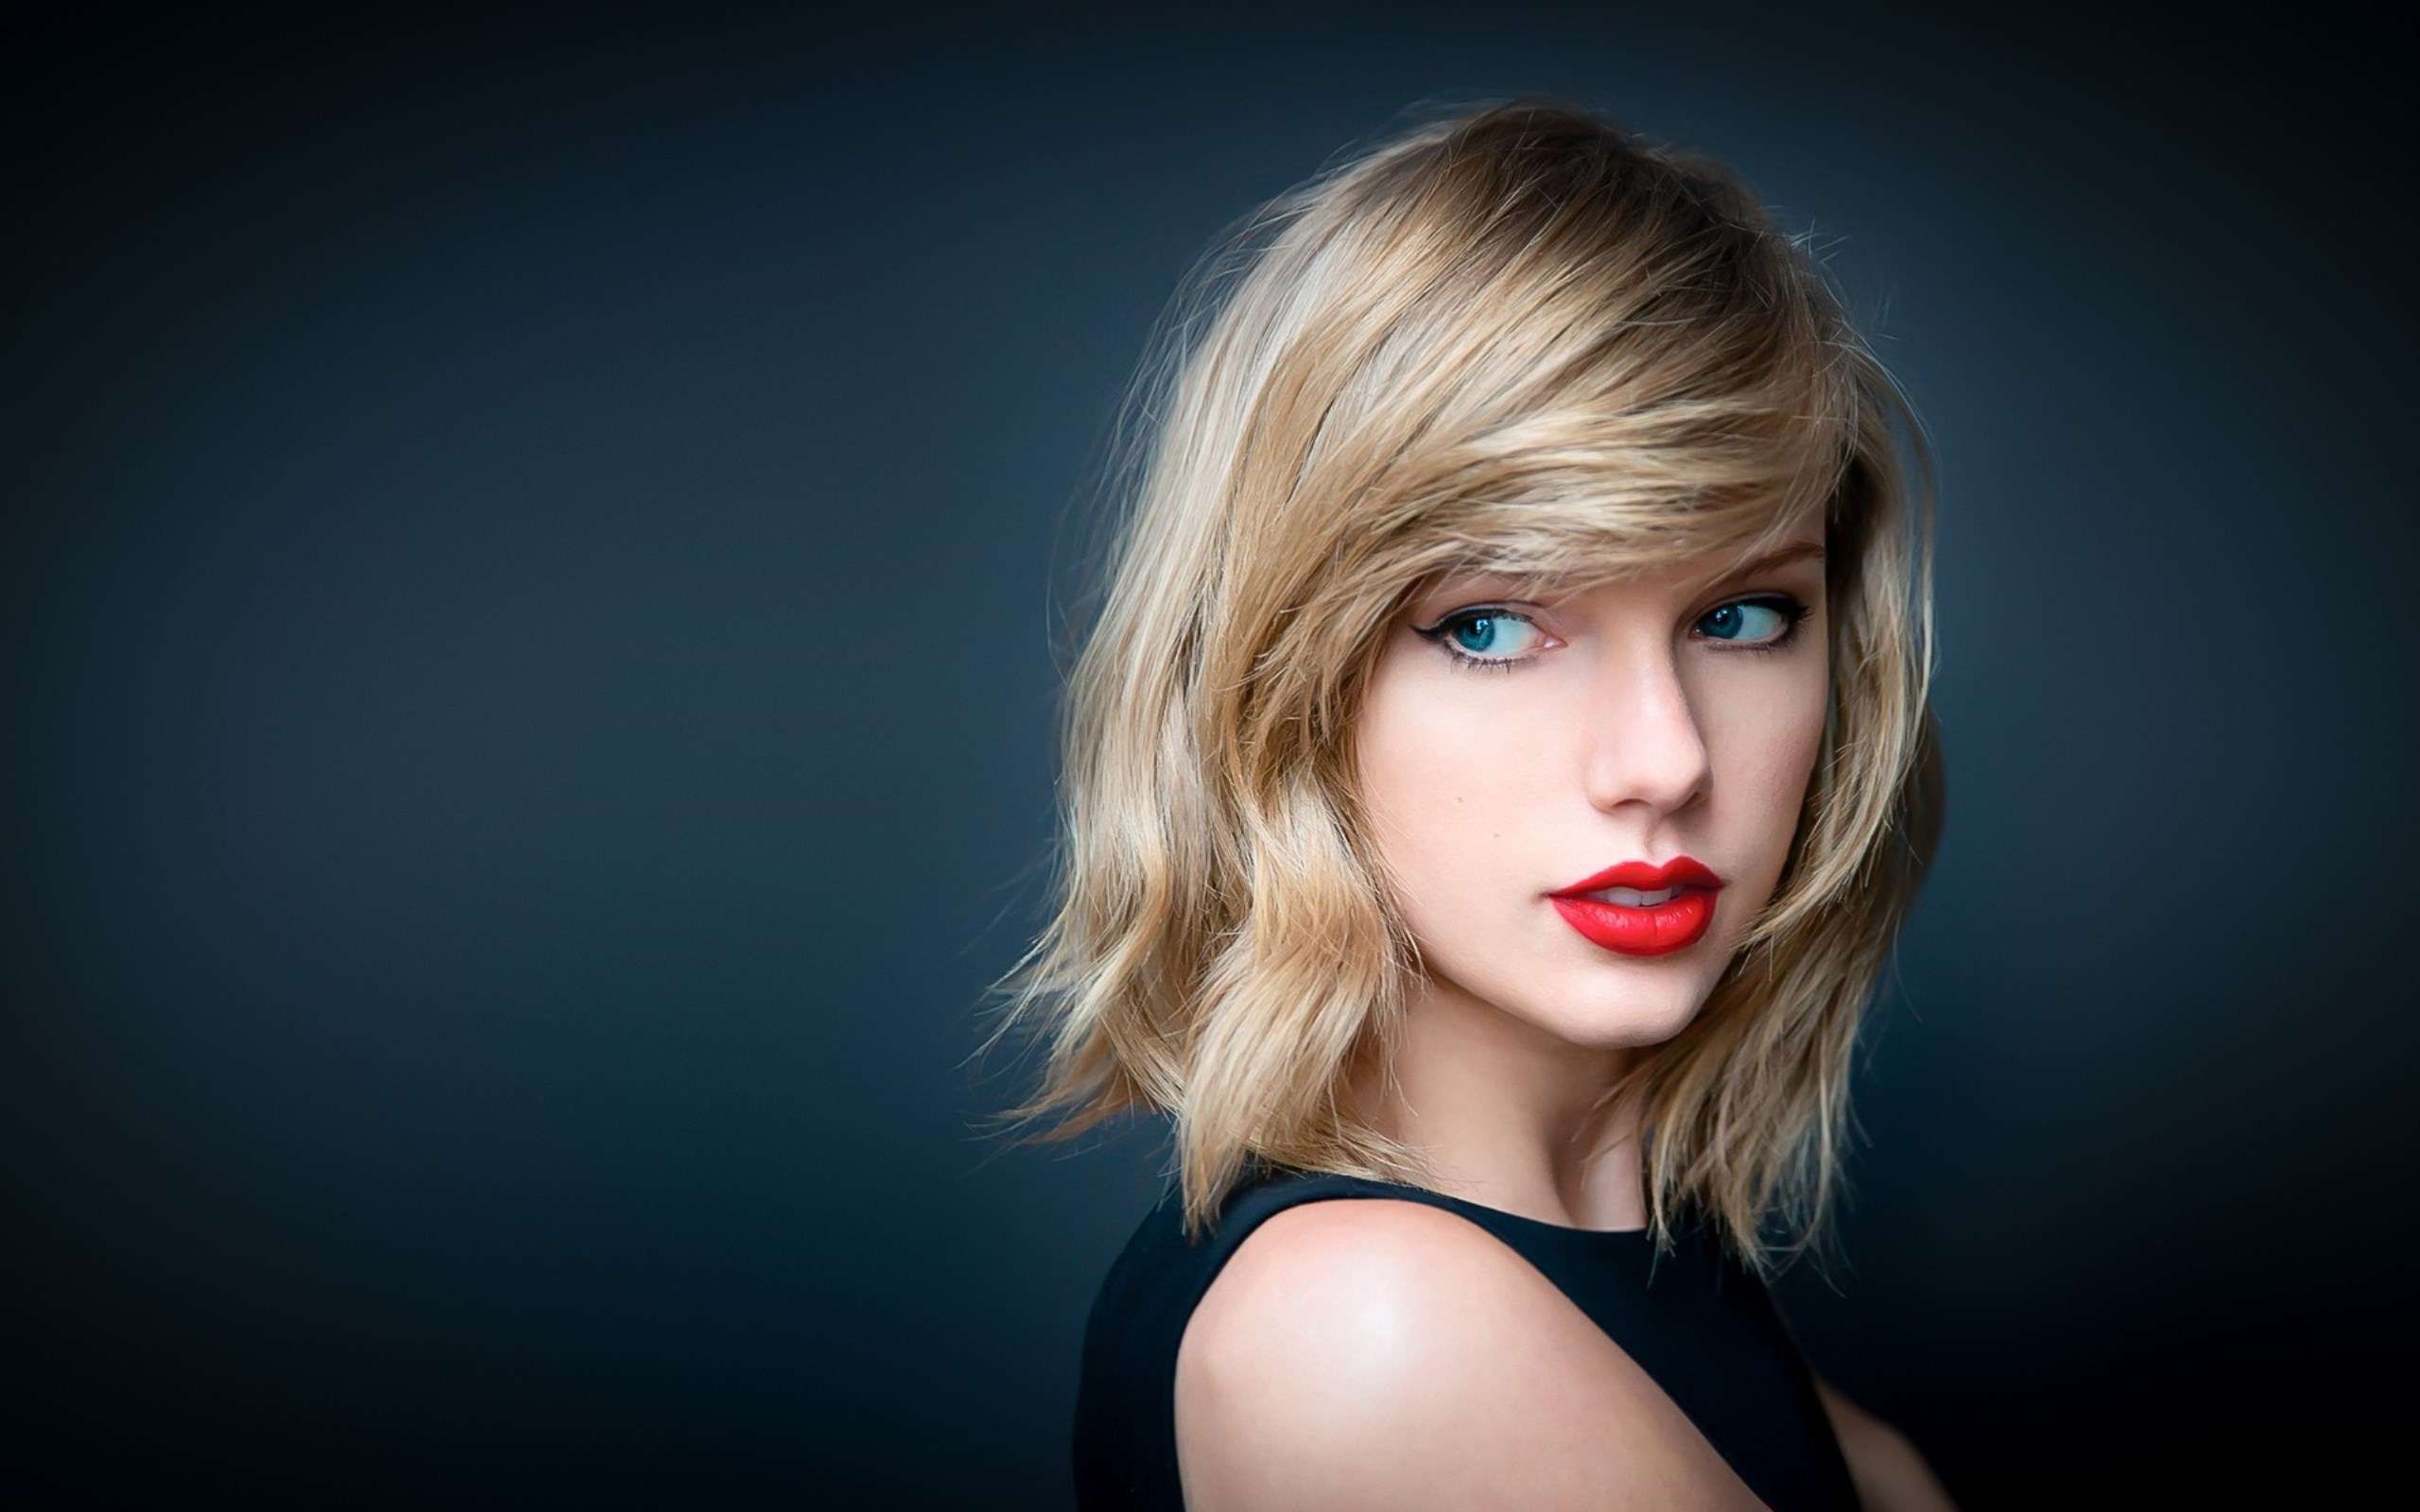 Taylor Swift Beautiful In Blue Top Wallpapers